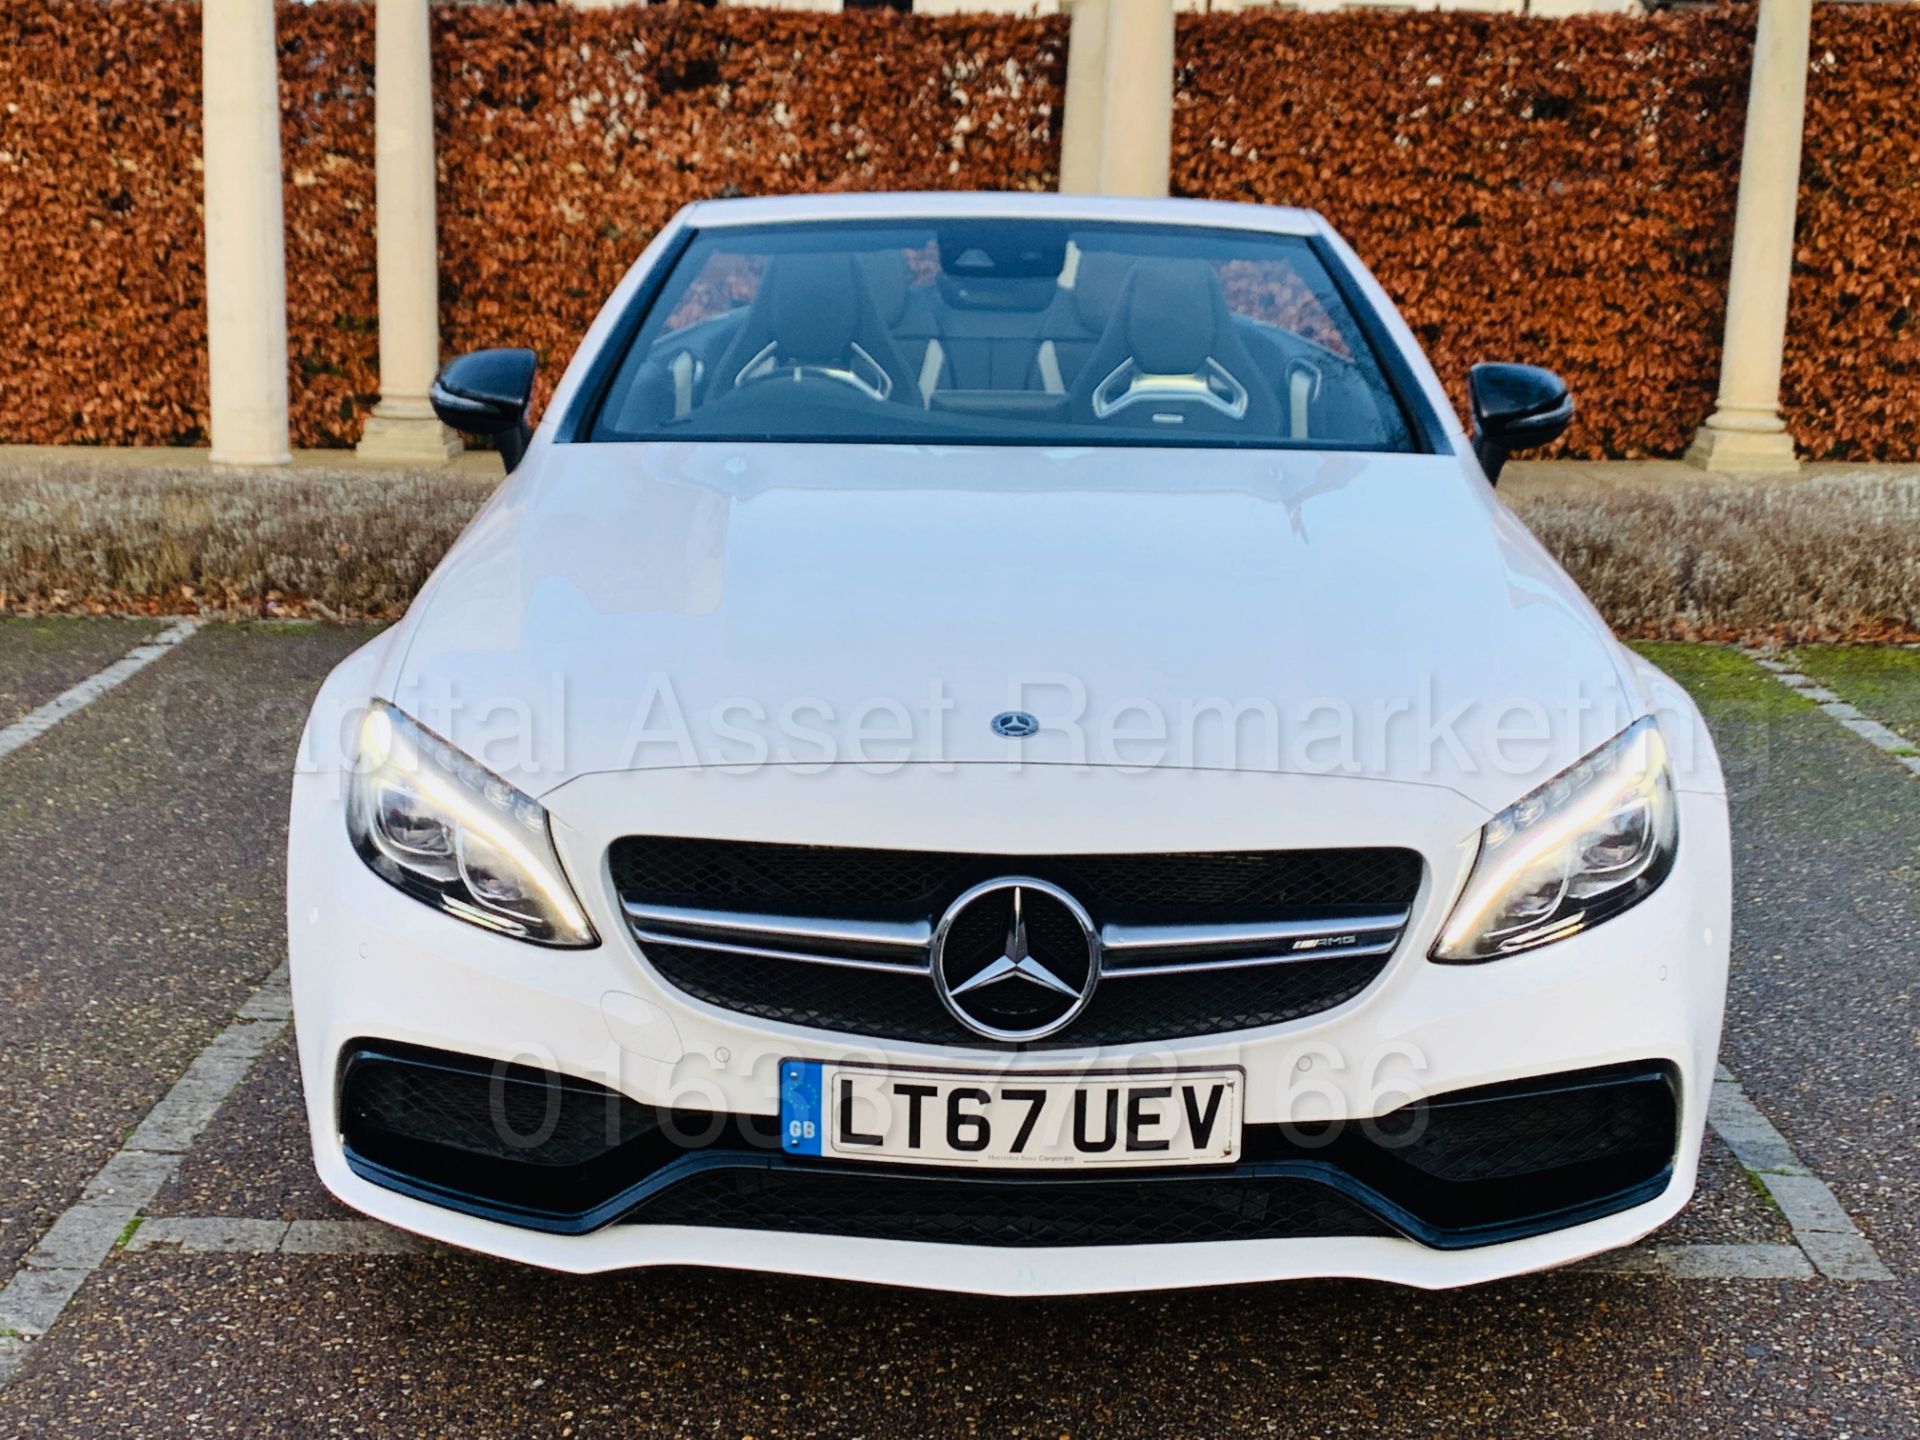 (On Sale) MERCEDES-BENZ AMG C63-S *CABRIOLET* (67 REG) '4.0 BI-TURBO -510 BHP - AUTO' *FULLY LOADED* - Image 7 of 79